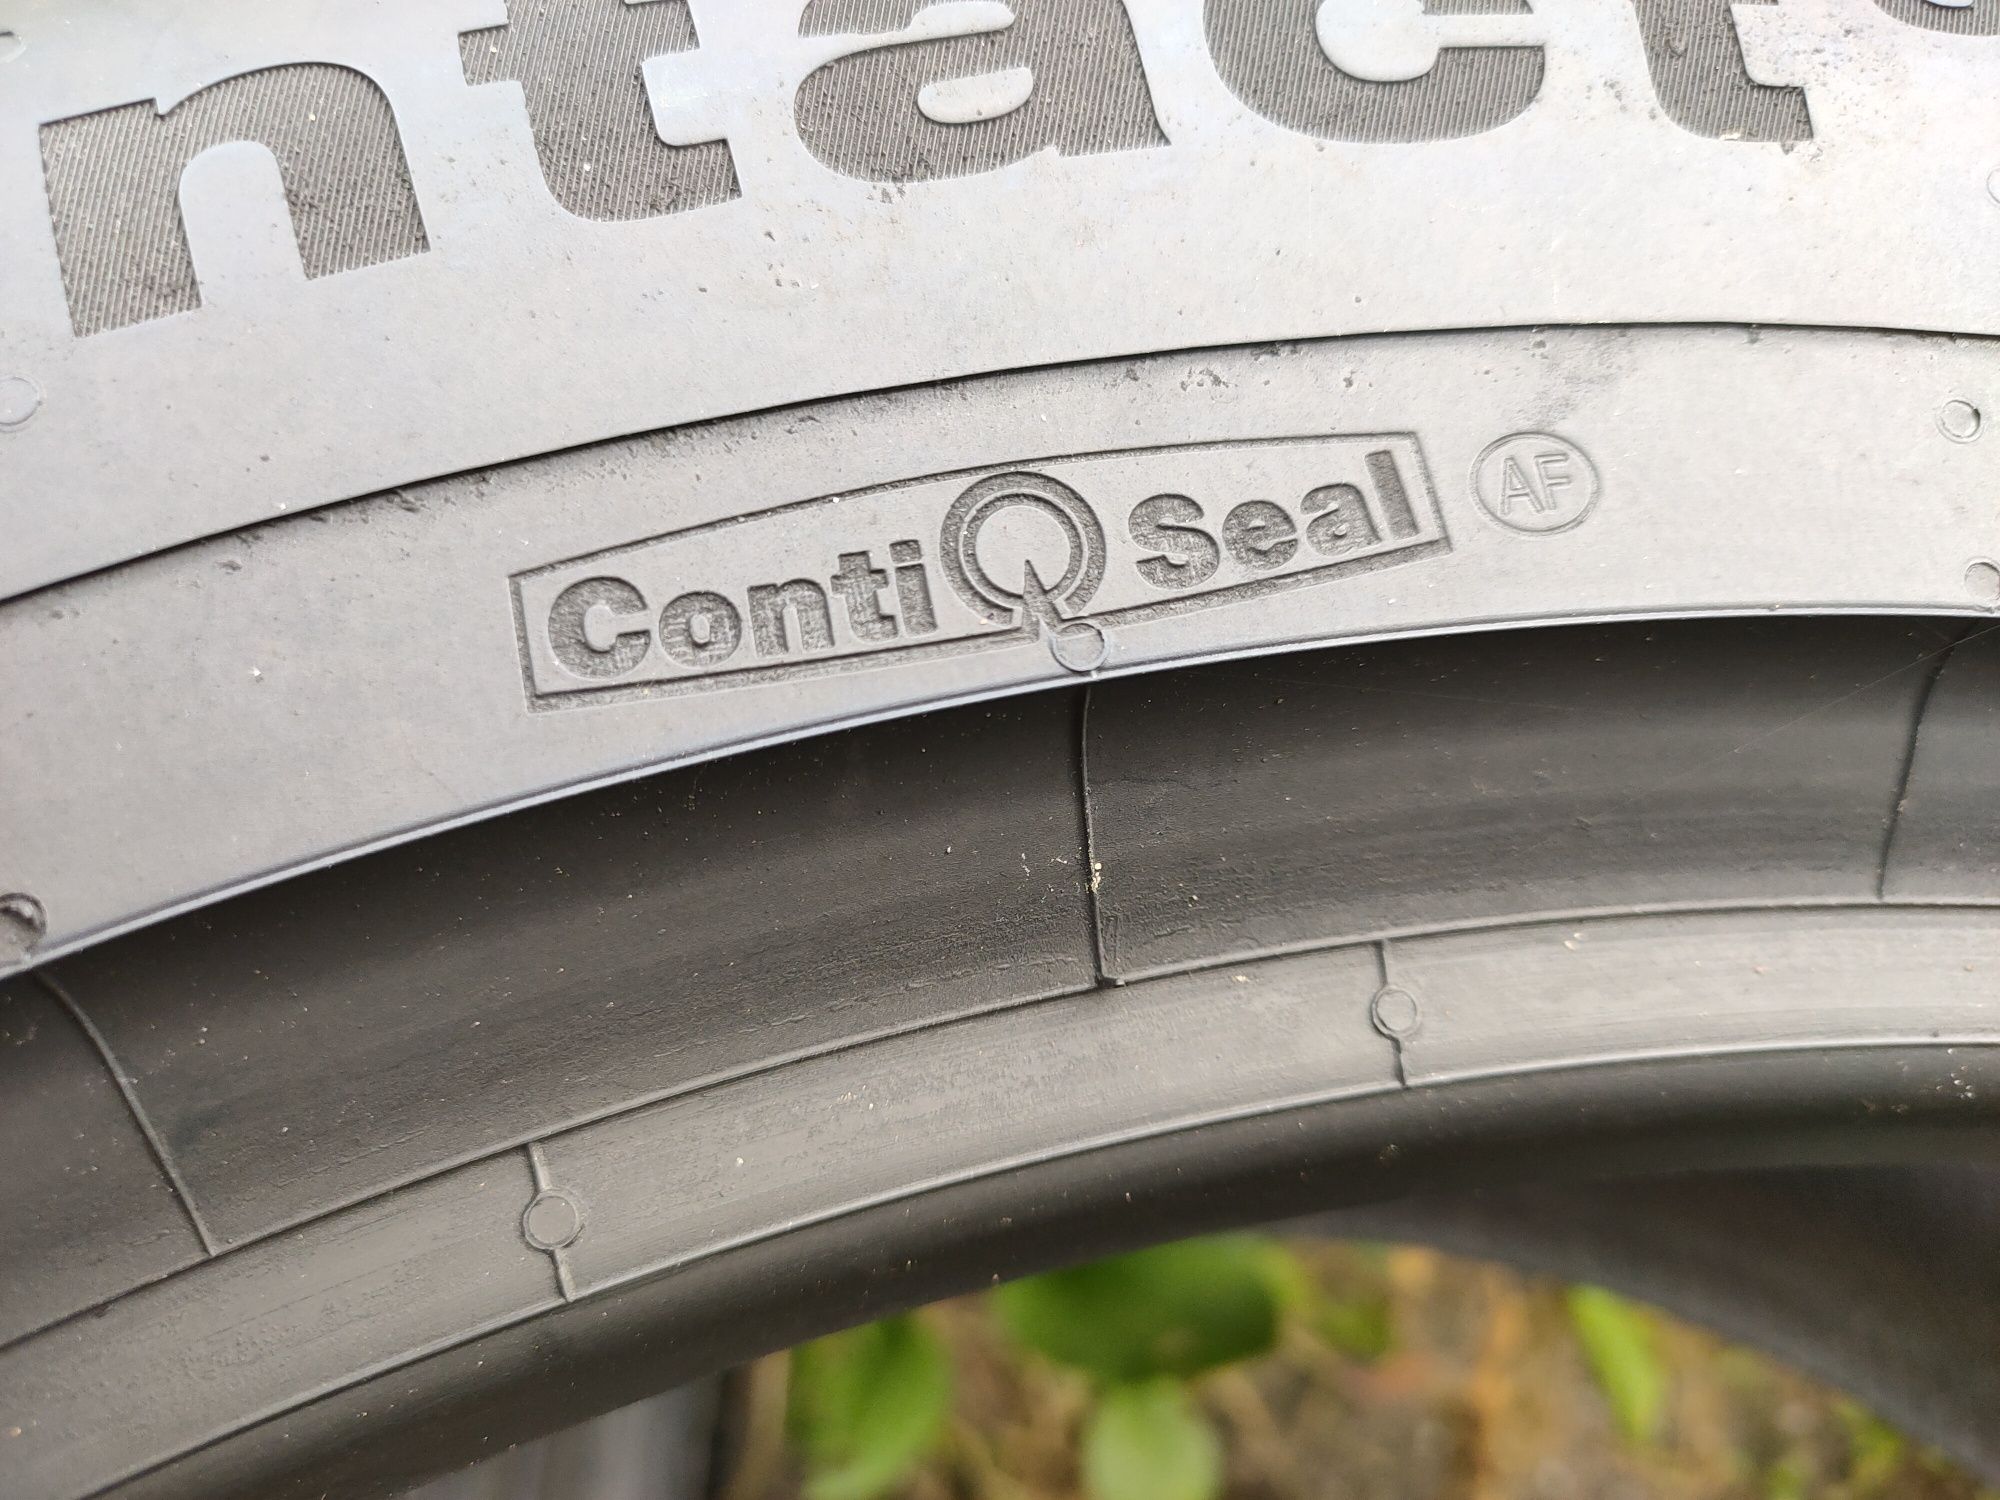 634 1x255/45R19 100V Continental ContiSportContact5 2019r 7.2mm FAKTUR